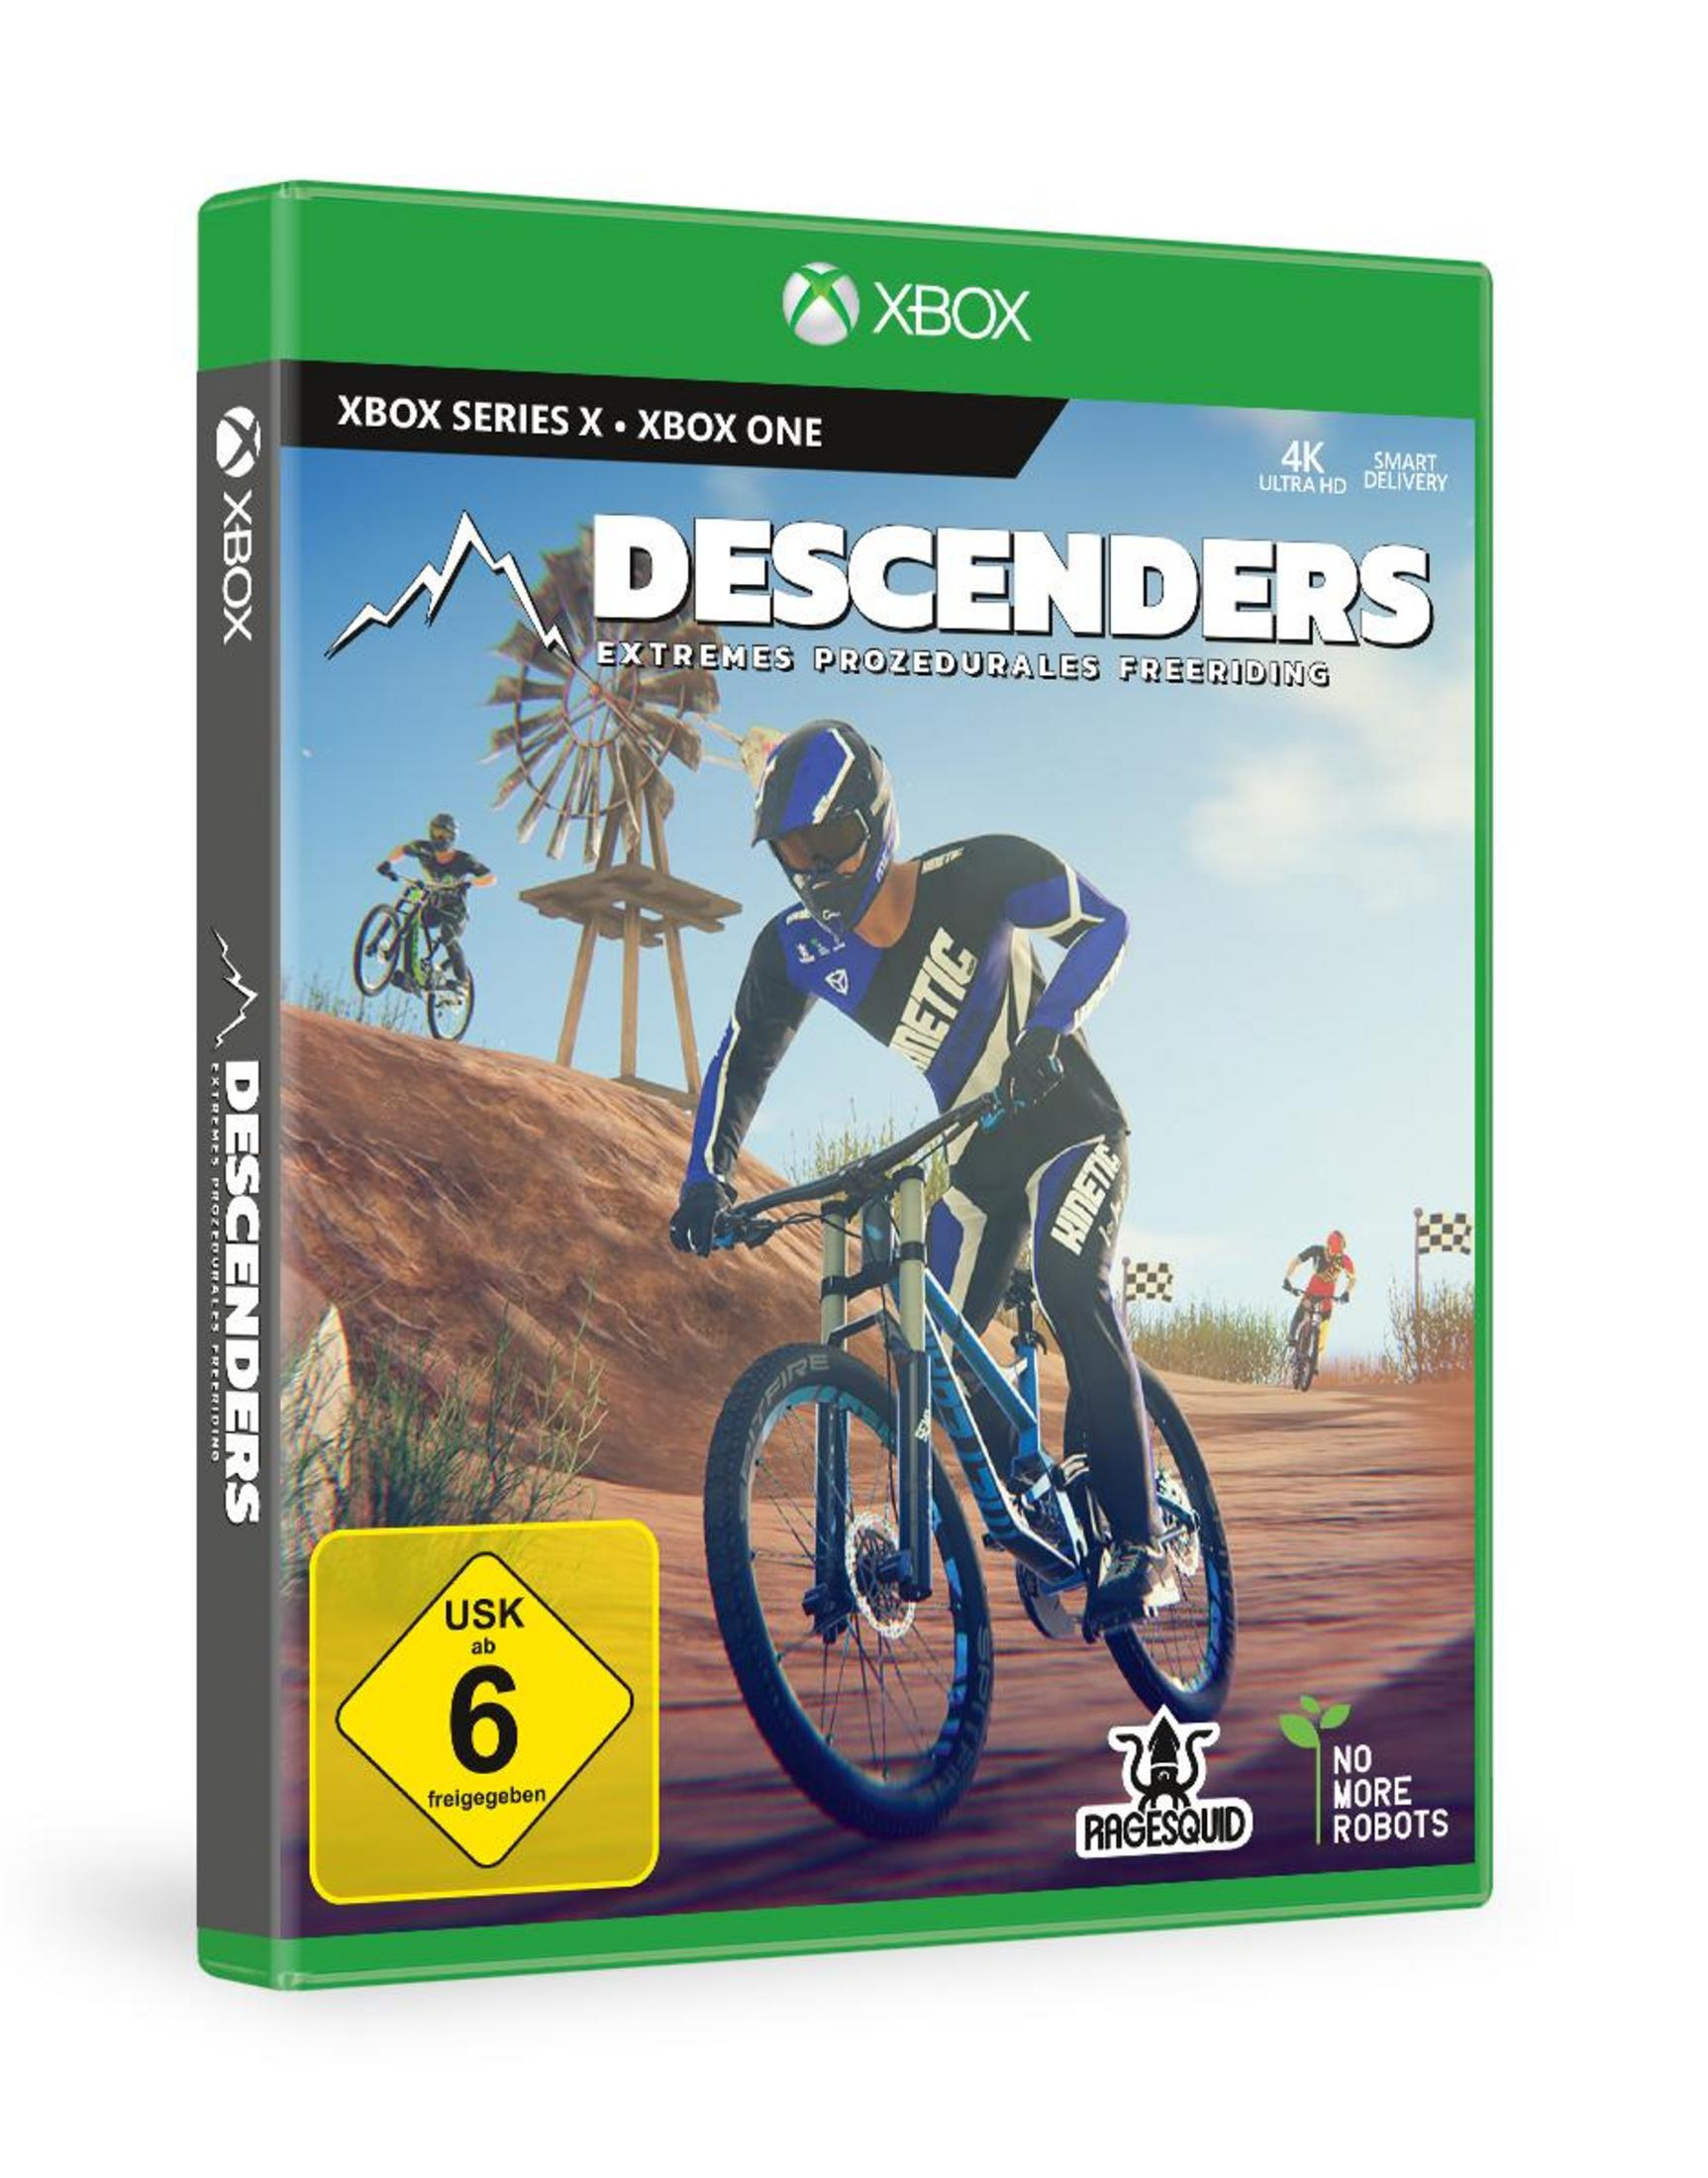 - XBSX One] Descenders [Xbox